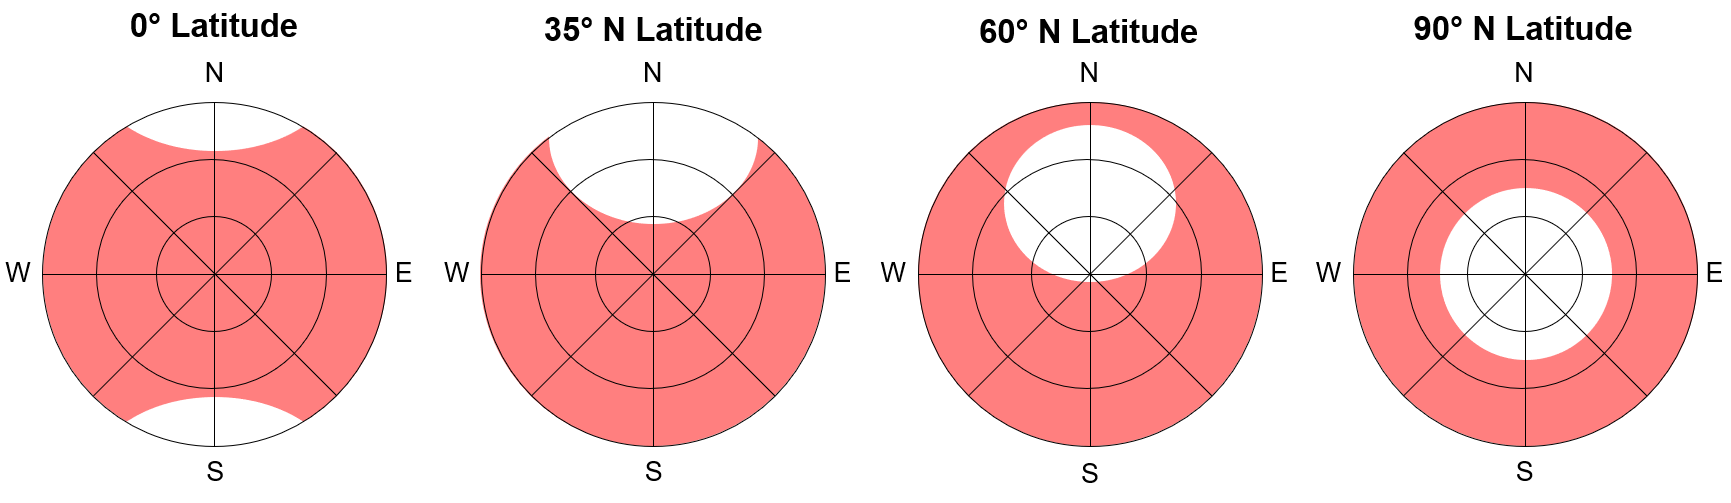 Sky plots showing the approximate coverage (red) of Global Position System satellites at different latitudes. The centre of the sky plot is directly overhead at the local latitude and the edge of the sky plot circle represents the horizon with the cardinal directions. Pickell, CC-BY-SA-4.0.